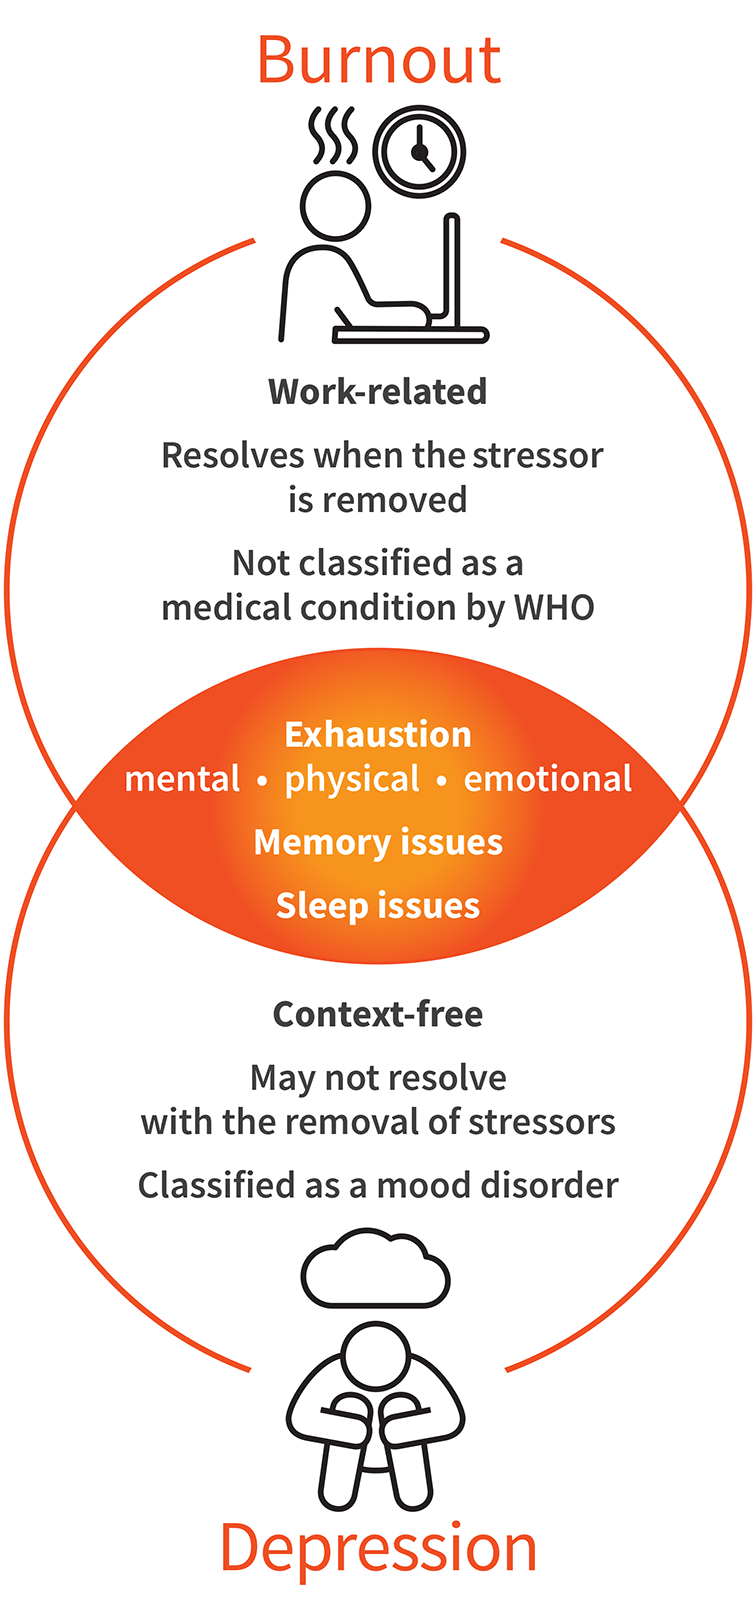 A Venn diagram comparing depression and burnout symptoms. The factors the conditions have in common are that they lead to exhaustion, and memory and sleep issues.